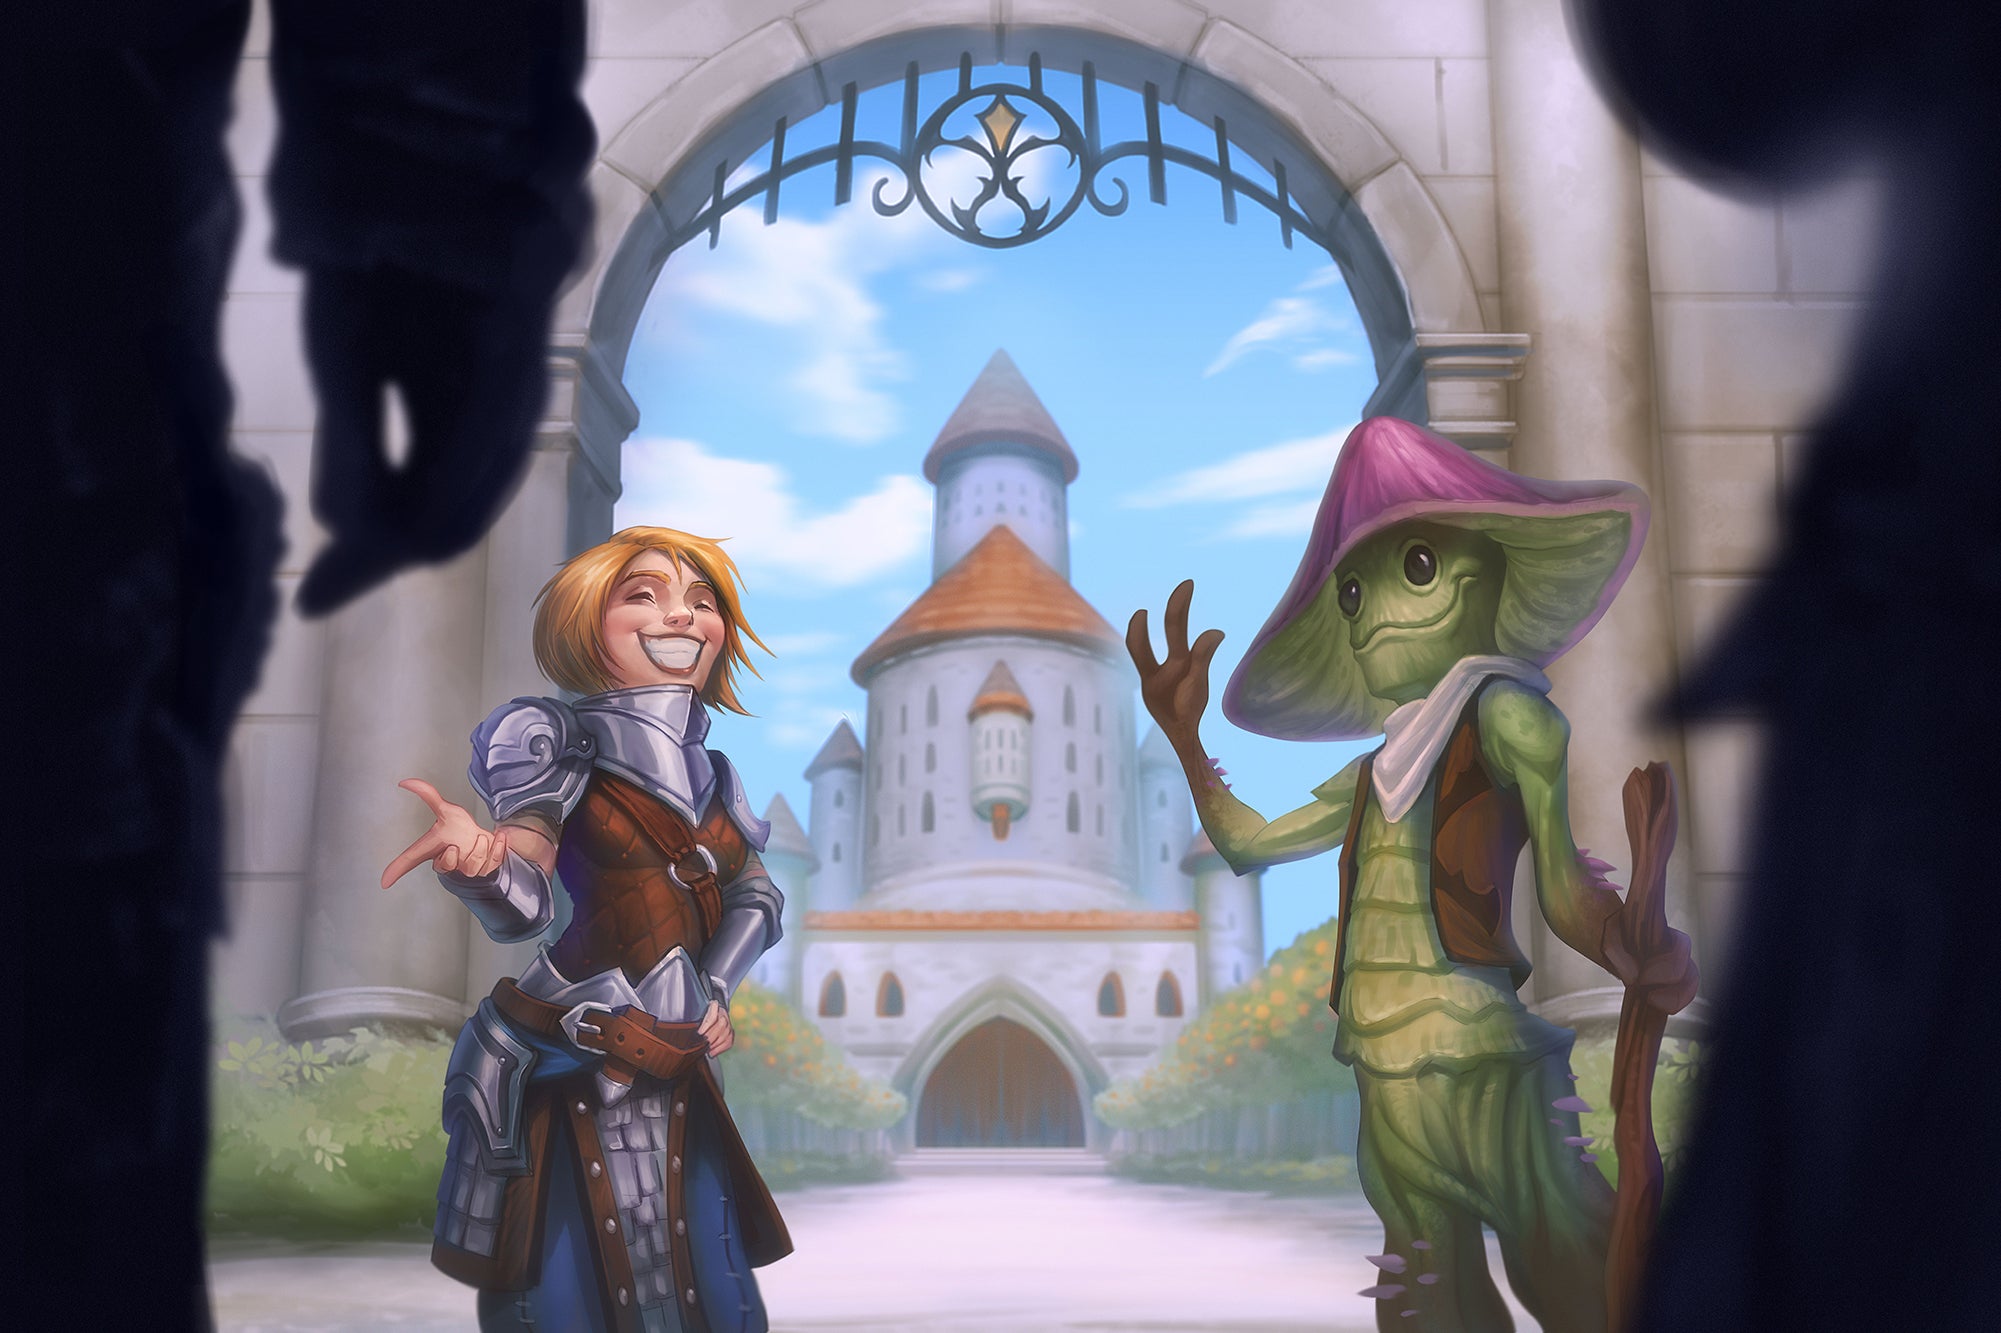 A halfling and a mushroom person welcome you through the gate to the Grand Lodge